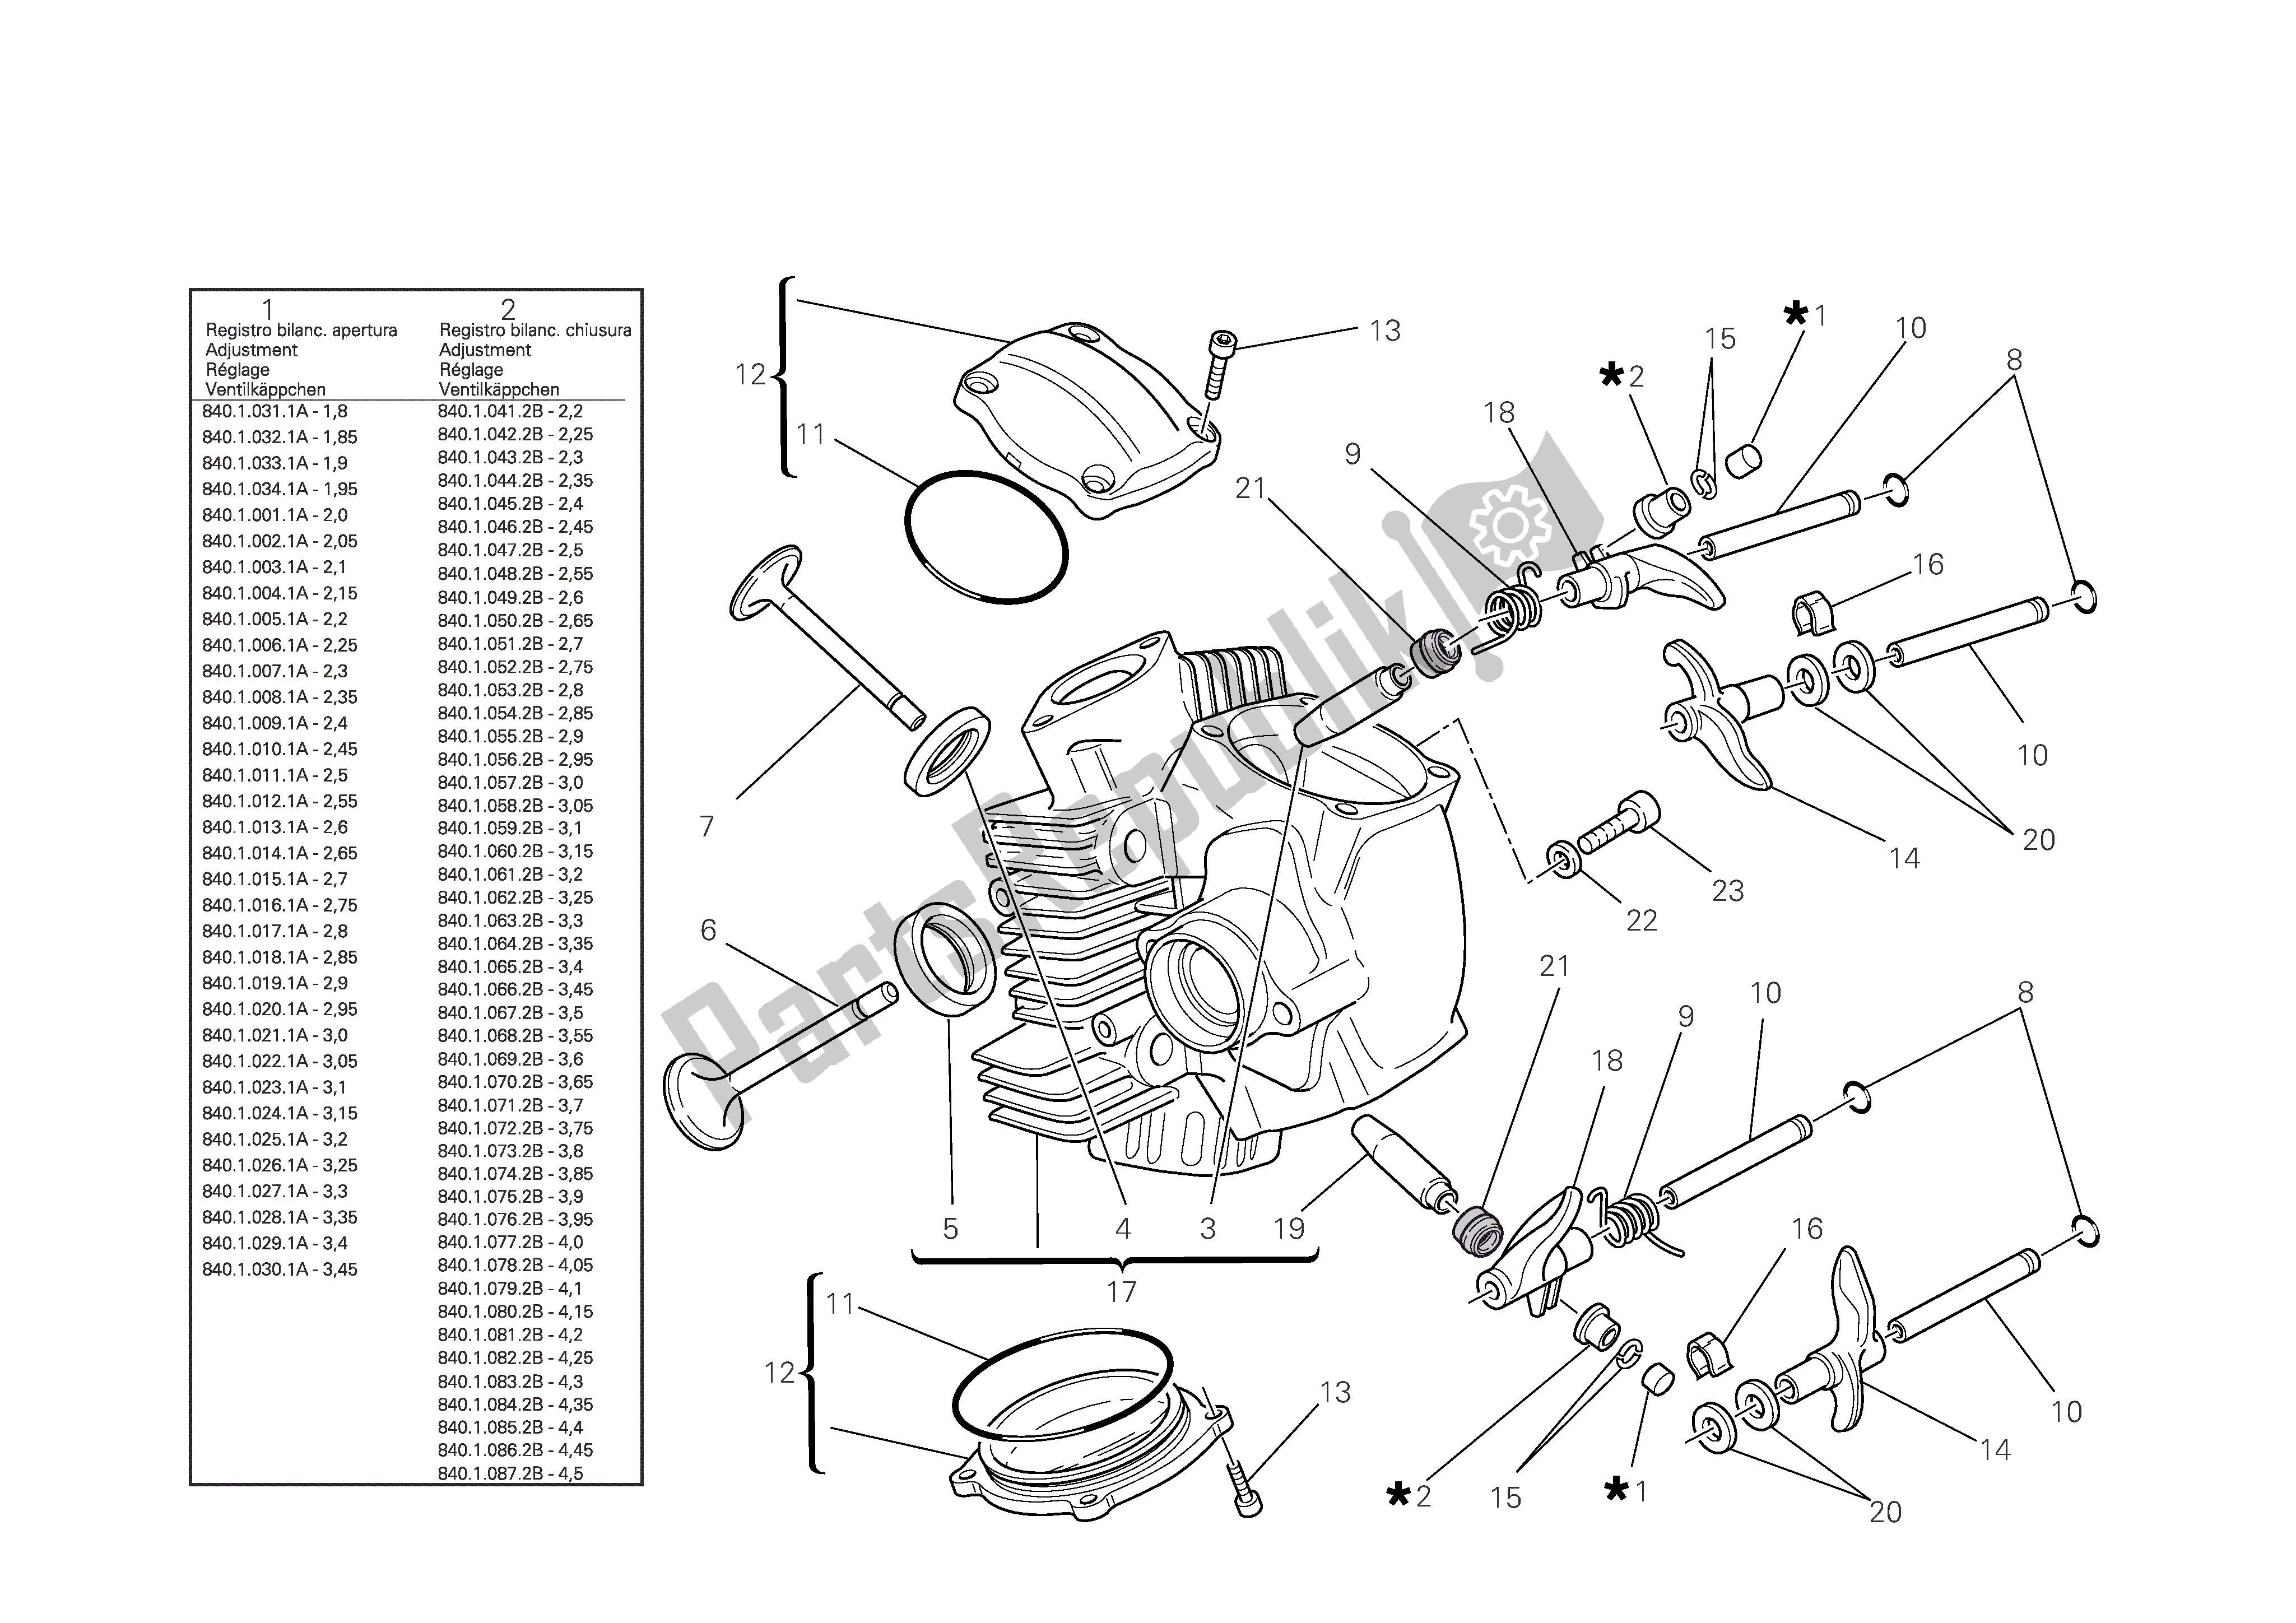 All parts for the Horizontal Cylinder Head of the Ducati Monster 696 2009